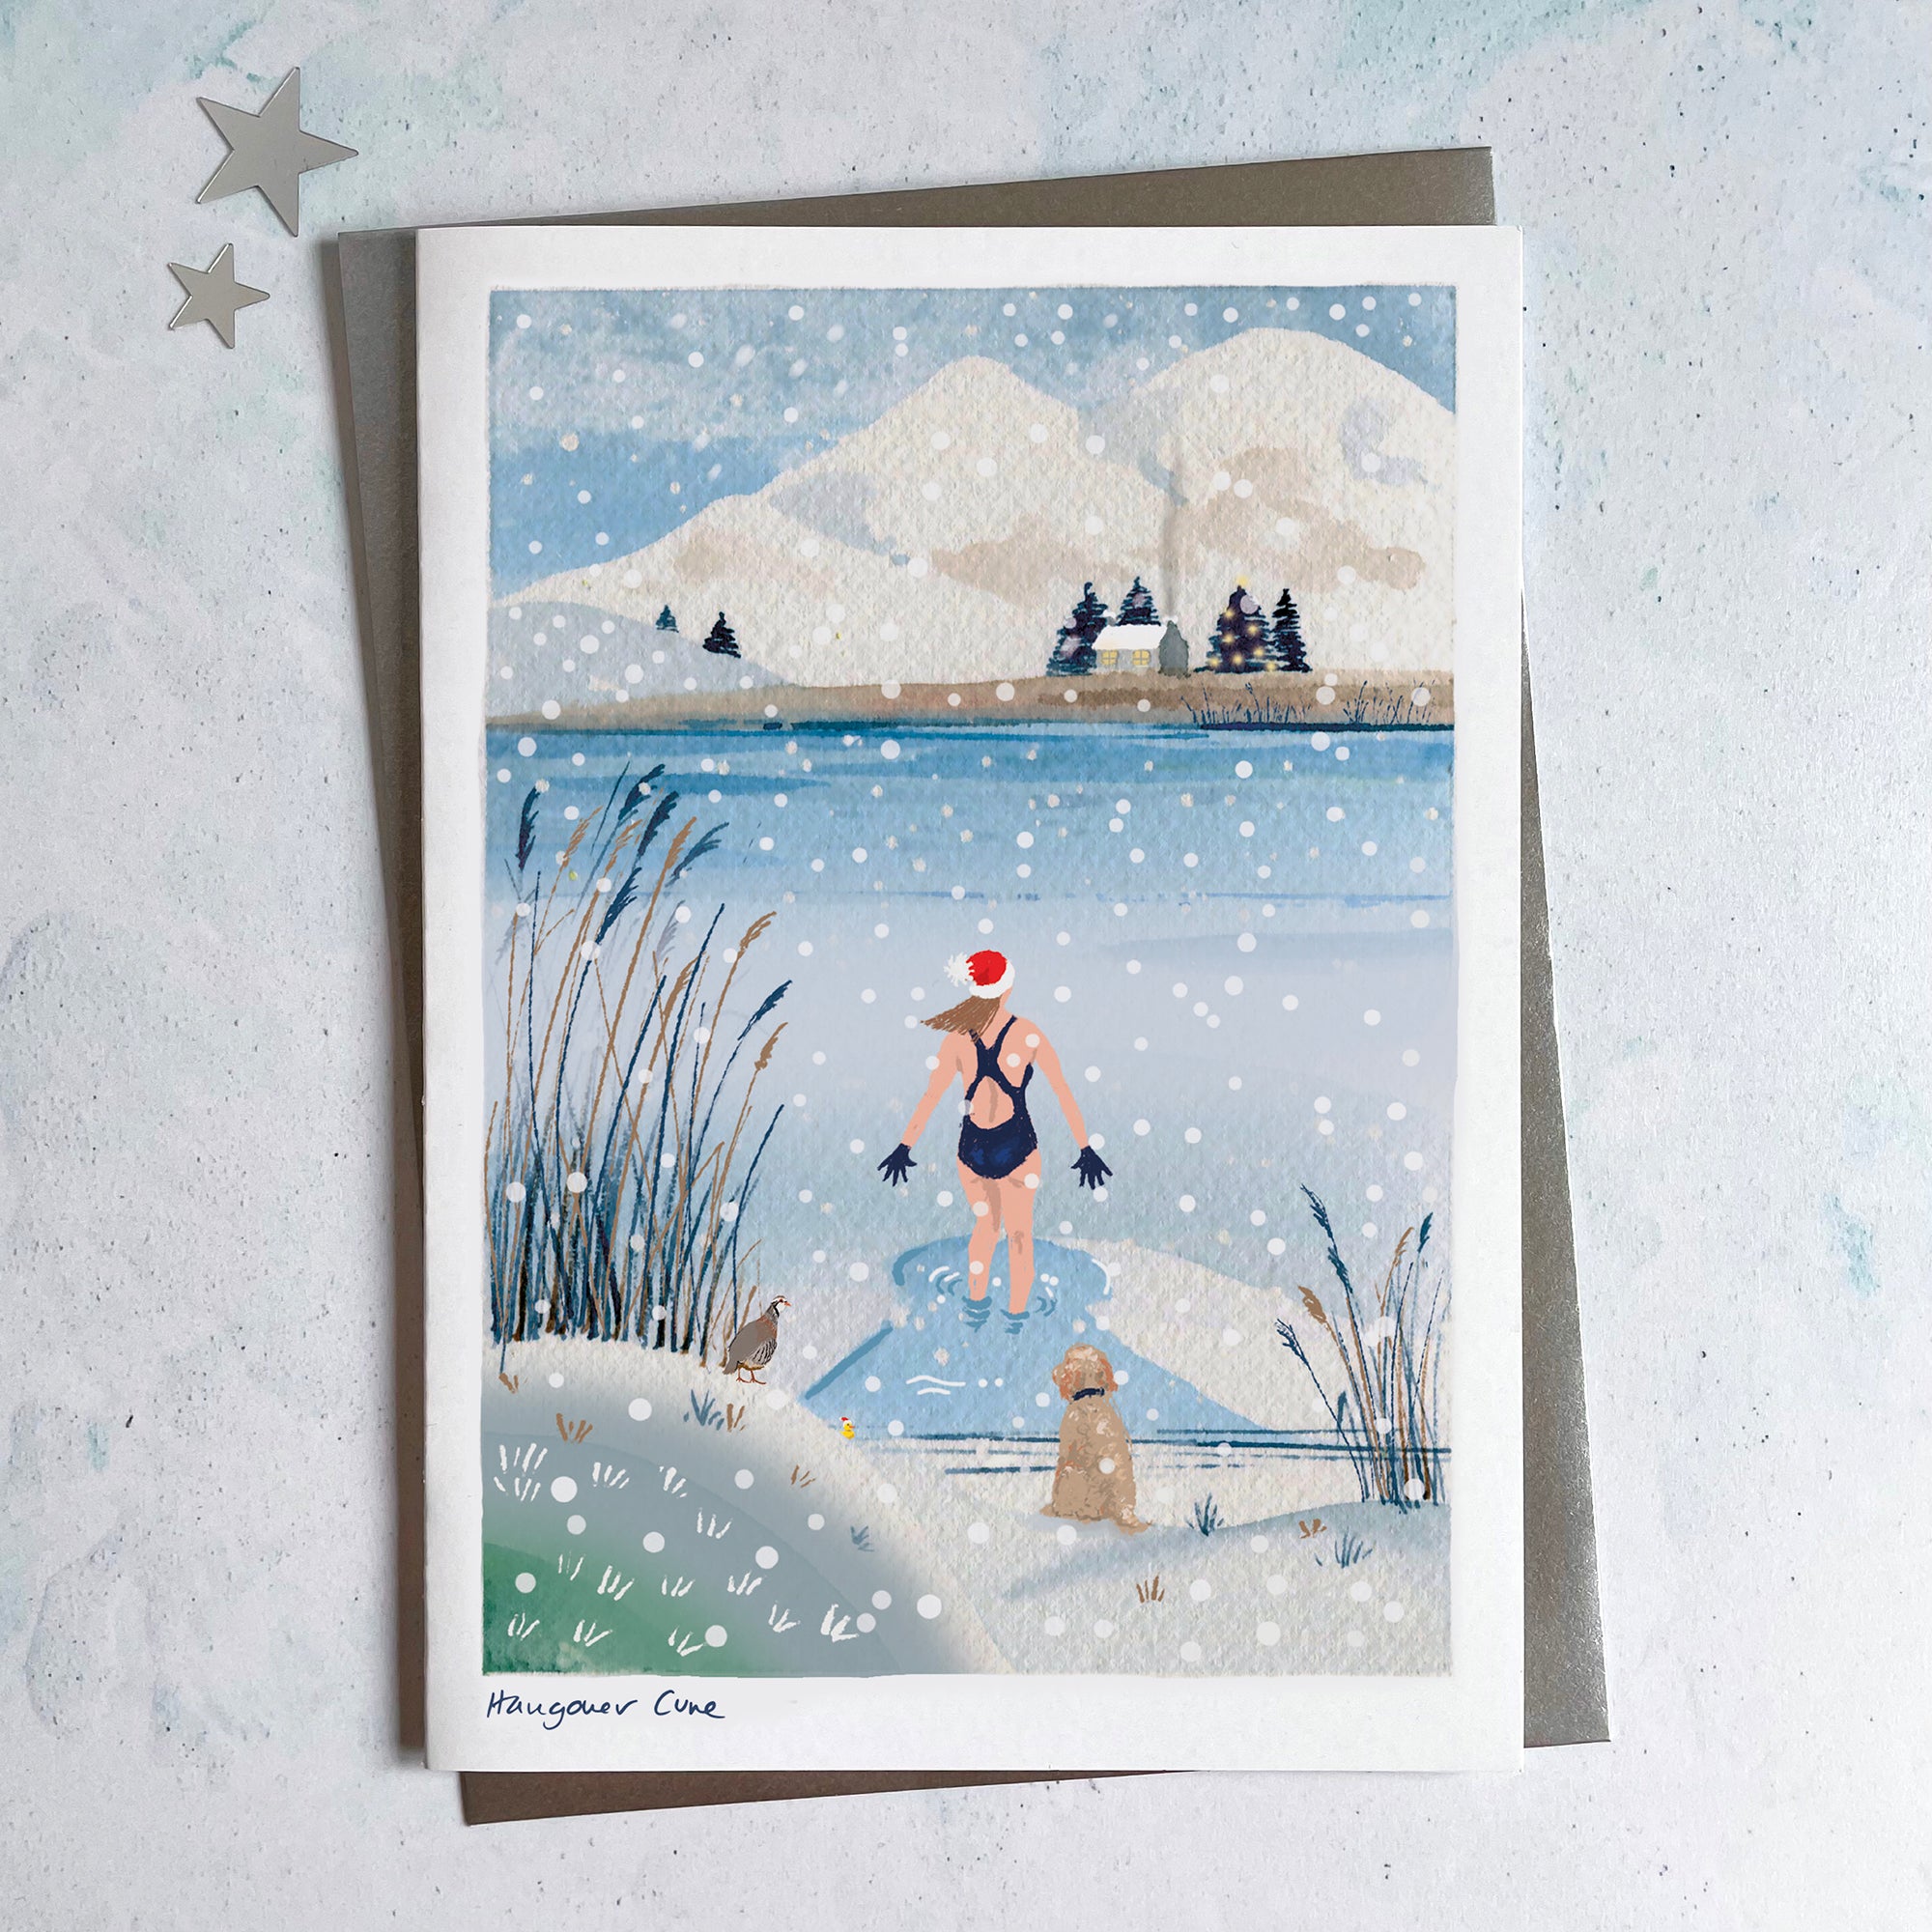 Wild Swimming Christmas card 'Hangover Cure'